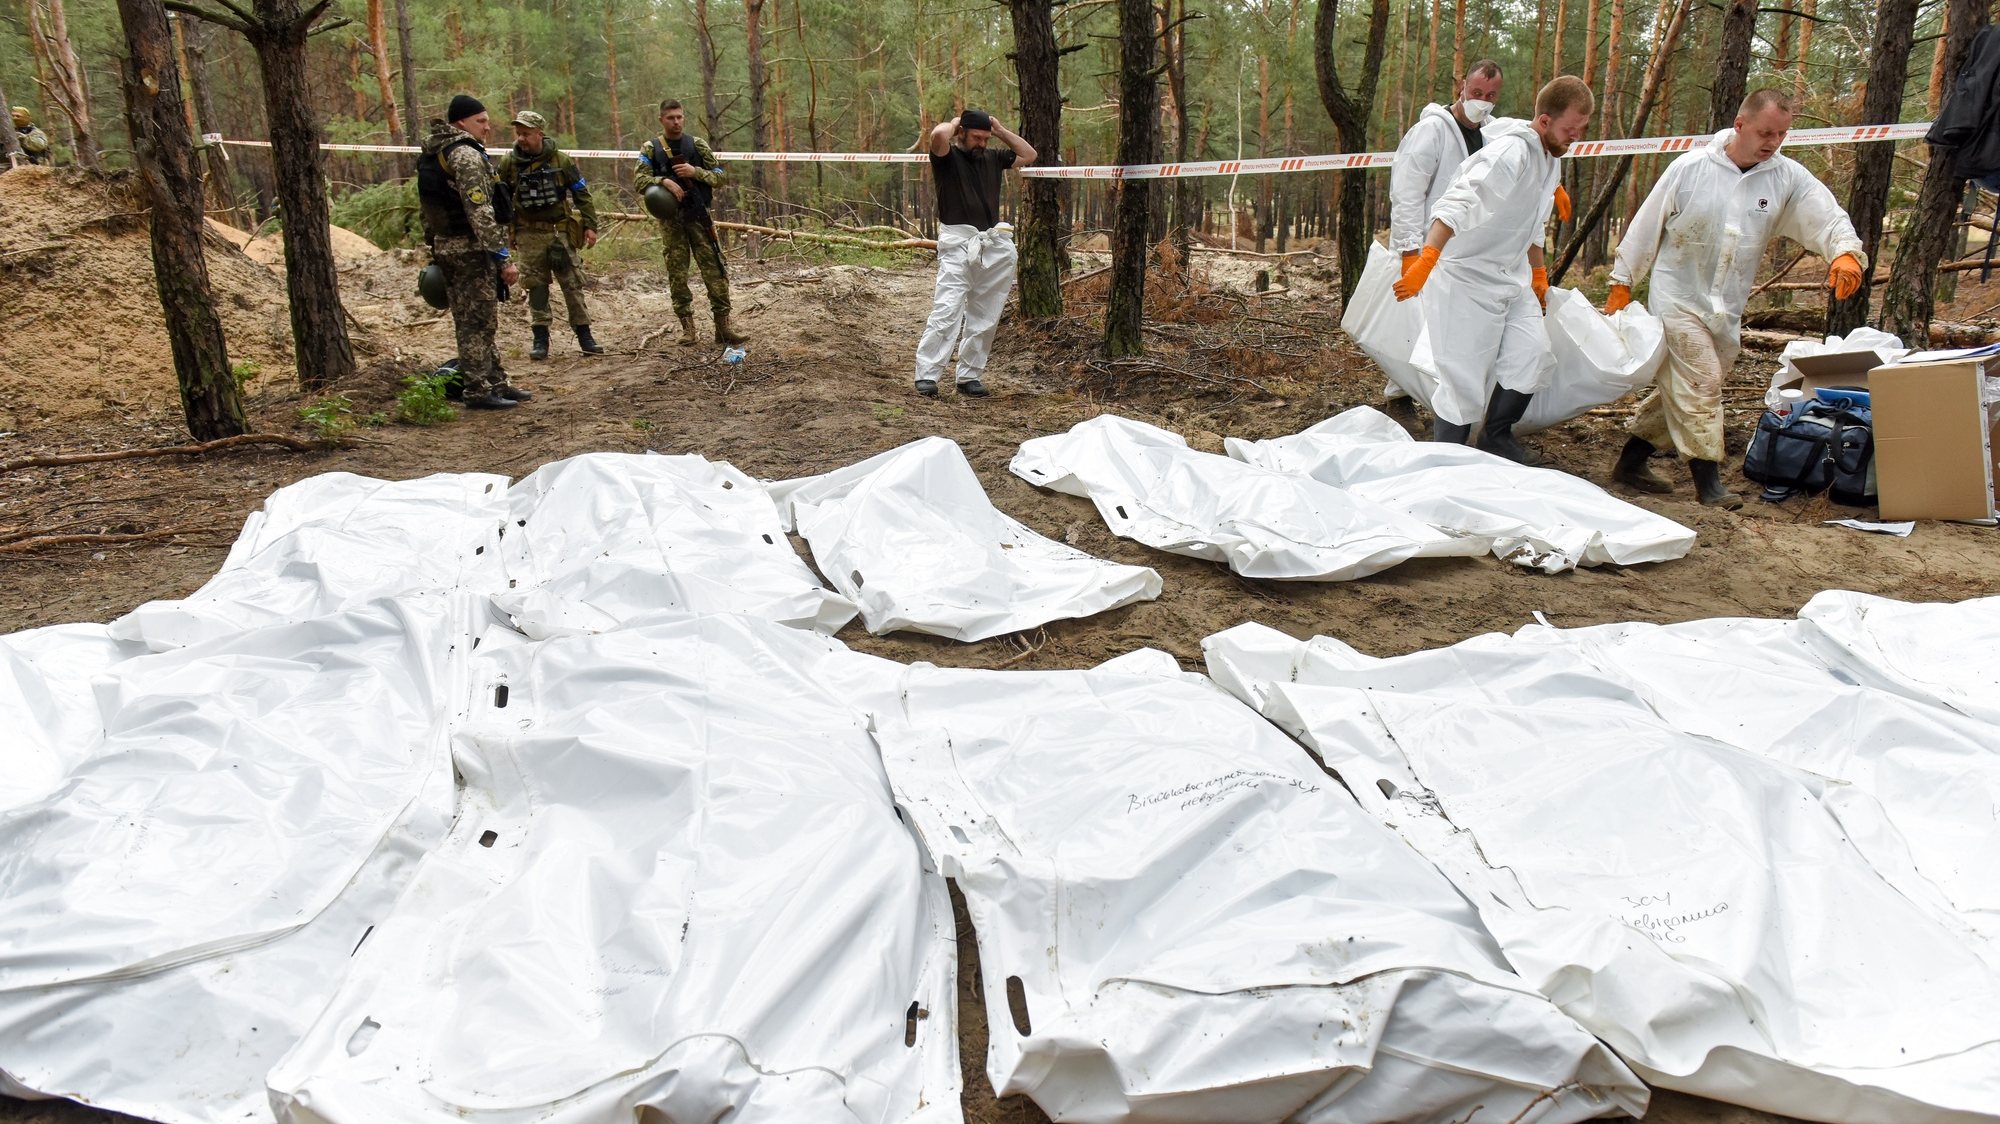 epa10188706 Ukrainian servicemen stand near workers carrying bodies that were were unearthed from graves in Izyum, Kharkiv region, northeastern Ukraine, 16 September 2022. A mass burial site was found after Ukrainian troops recaptured the town of Izyum. According to the head of the investigative department of the police of the Kharkiv region, the burial site, one of the largest in a recaptured city so far, counts more than 440 separate graves. The Ukrainian army pushed Russian troops from occupied territory in the northeast of the country in a counterattack. Kharkiv and surrounding areas have been the target of heavy shelling since February 2022, when Russian troops entered Ukraine starting a conflict that has provoked destruction and a humanitarian crisis.  EPA/OLEG PETRASYUK  EPA-EFE/OLEG PETRASYUK